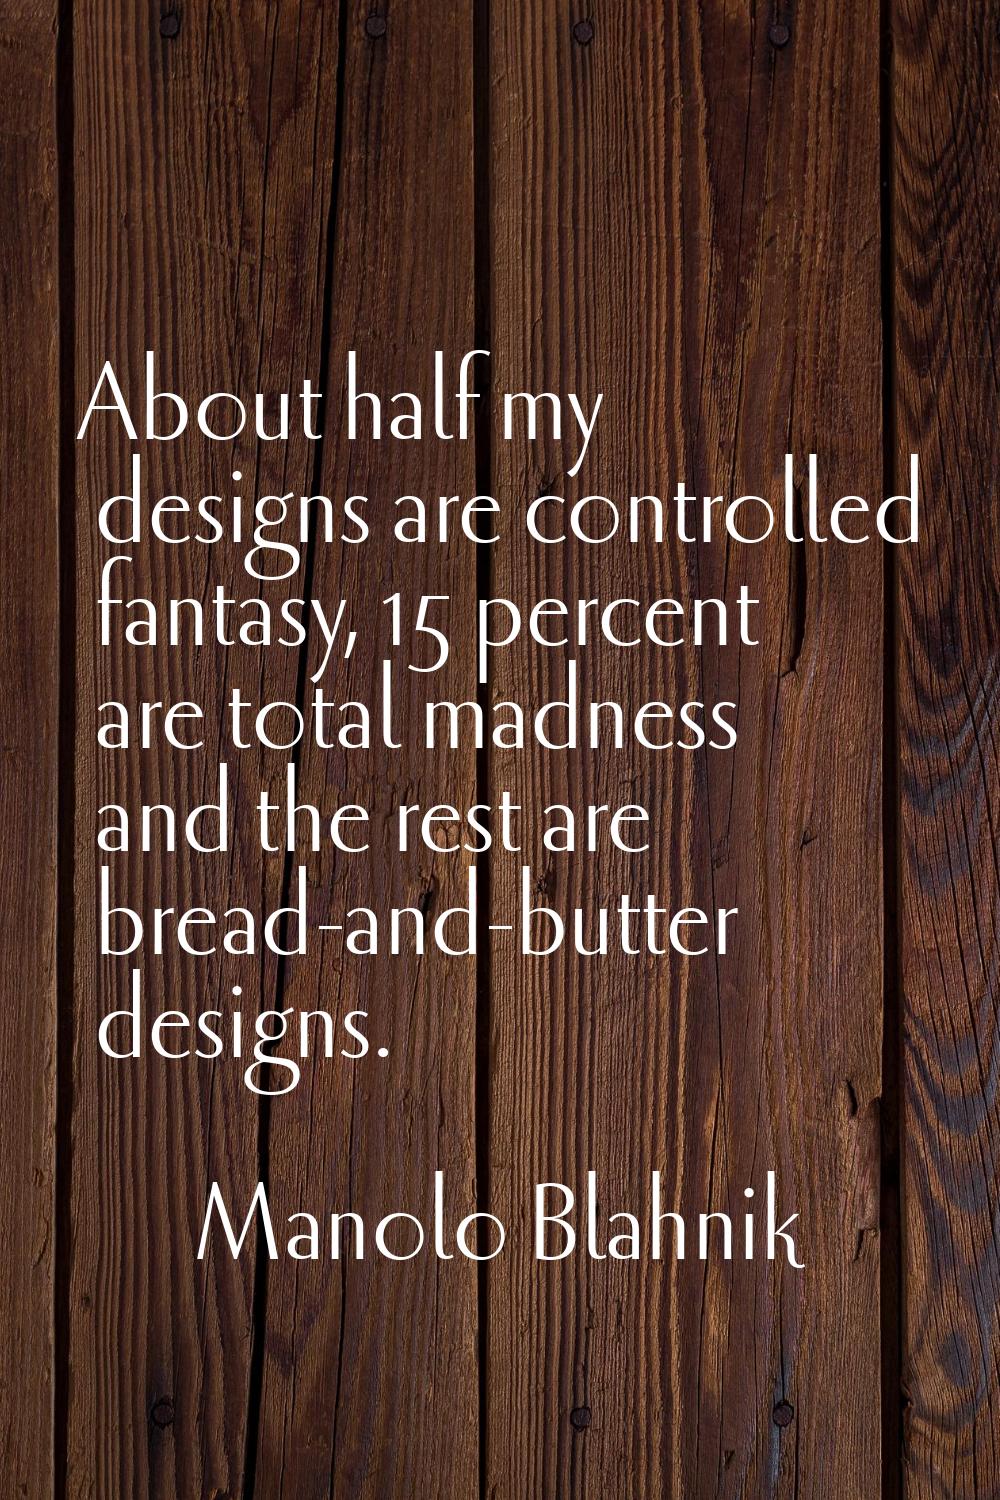 About half my designs are controlled fantasy, 15 percent are total madness and the rest are bread-a